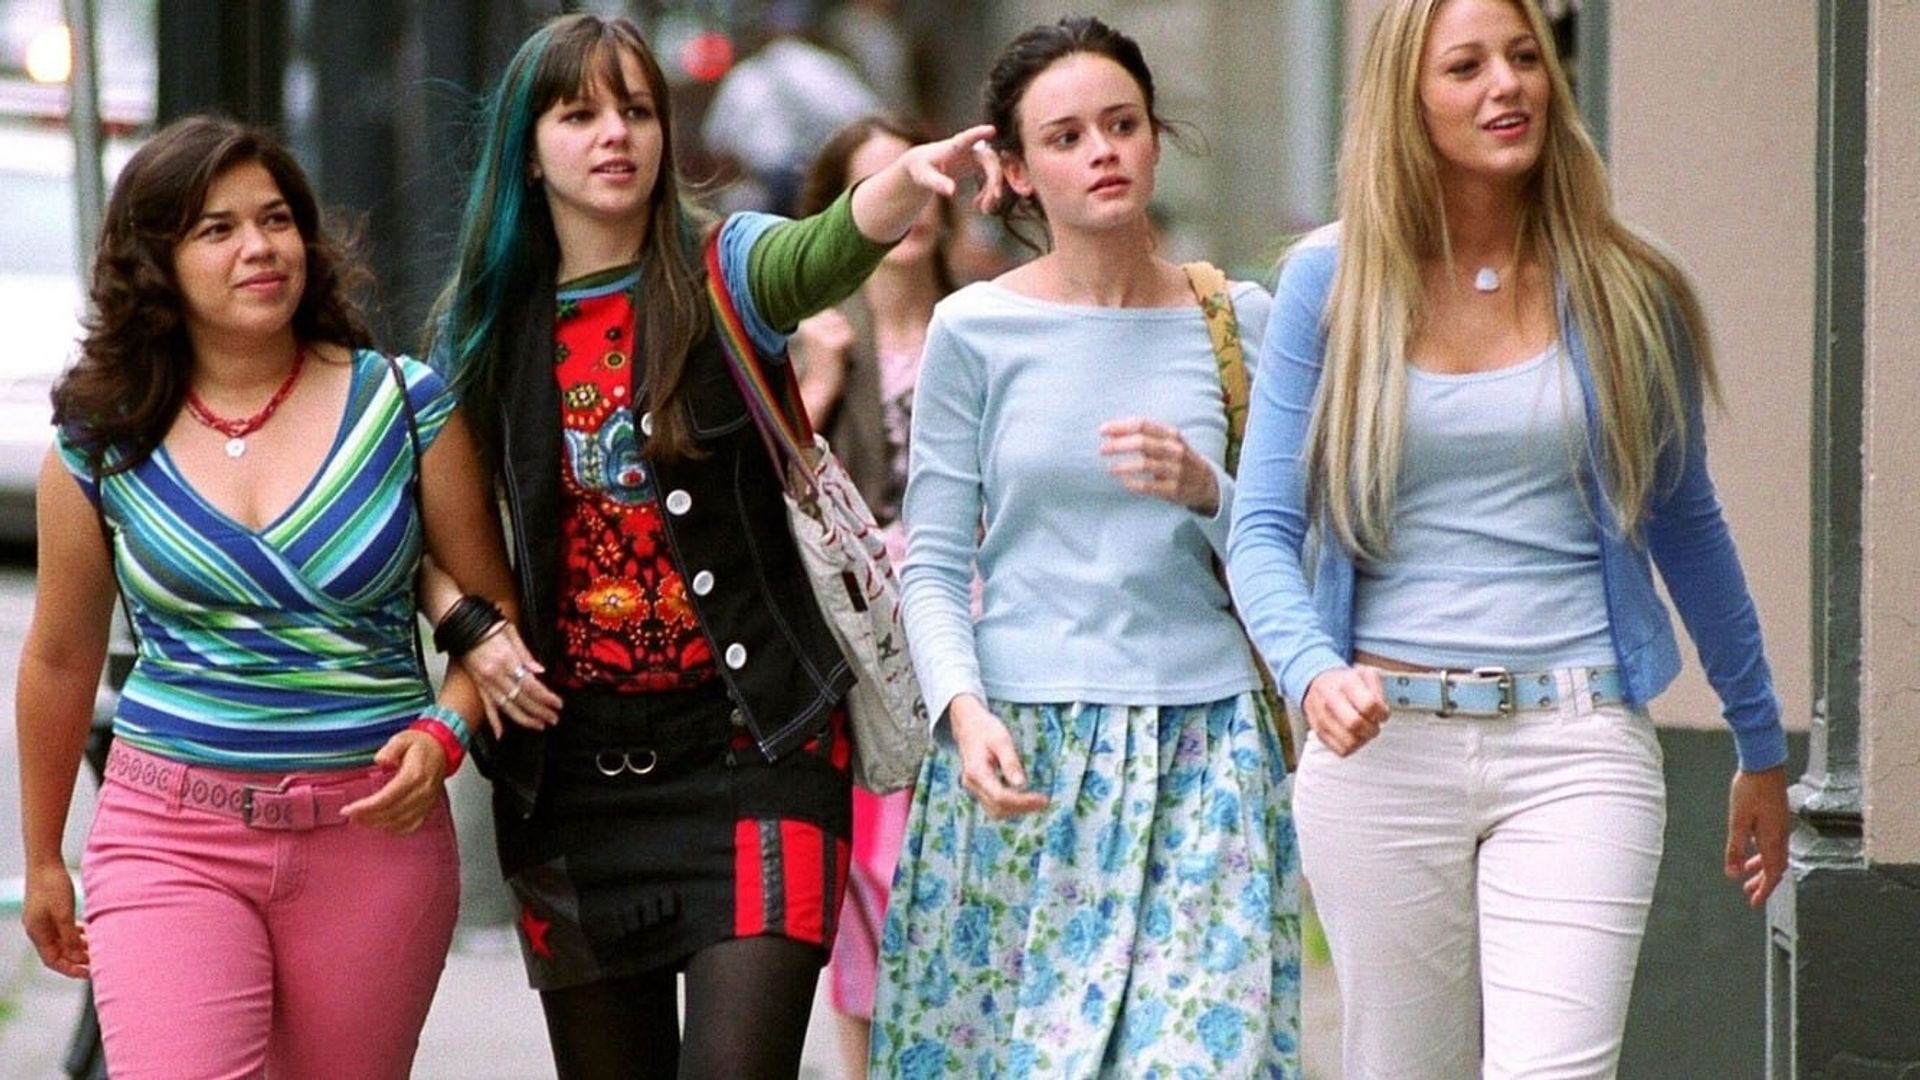 The Sisterhood of the Traveling Pants background